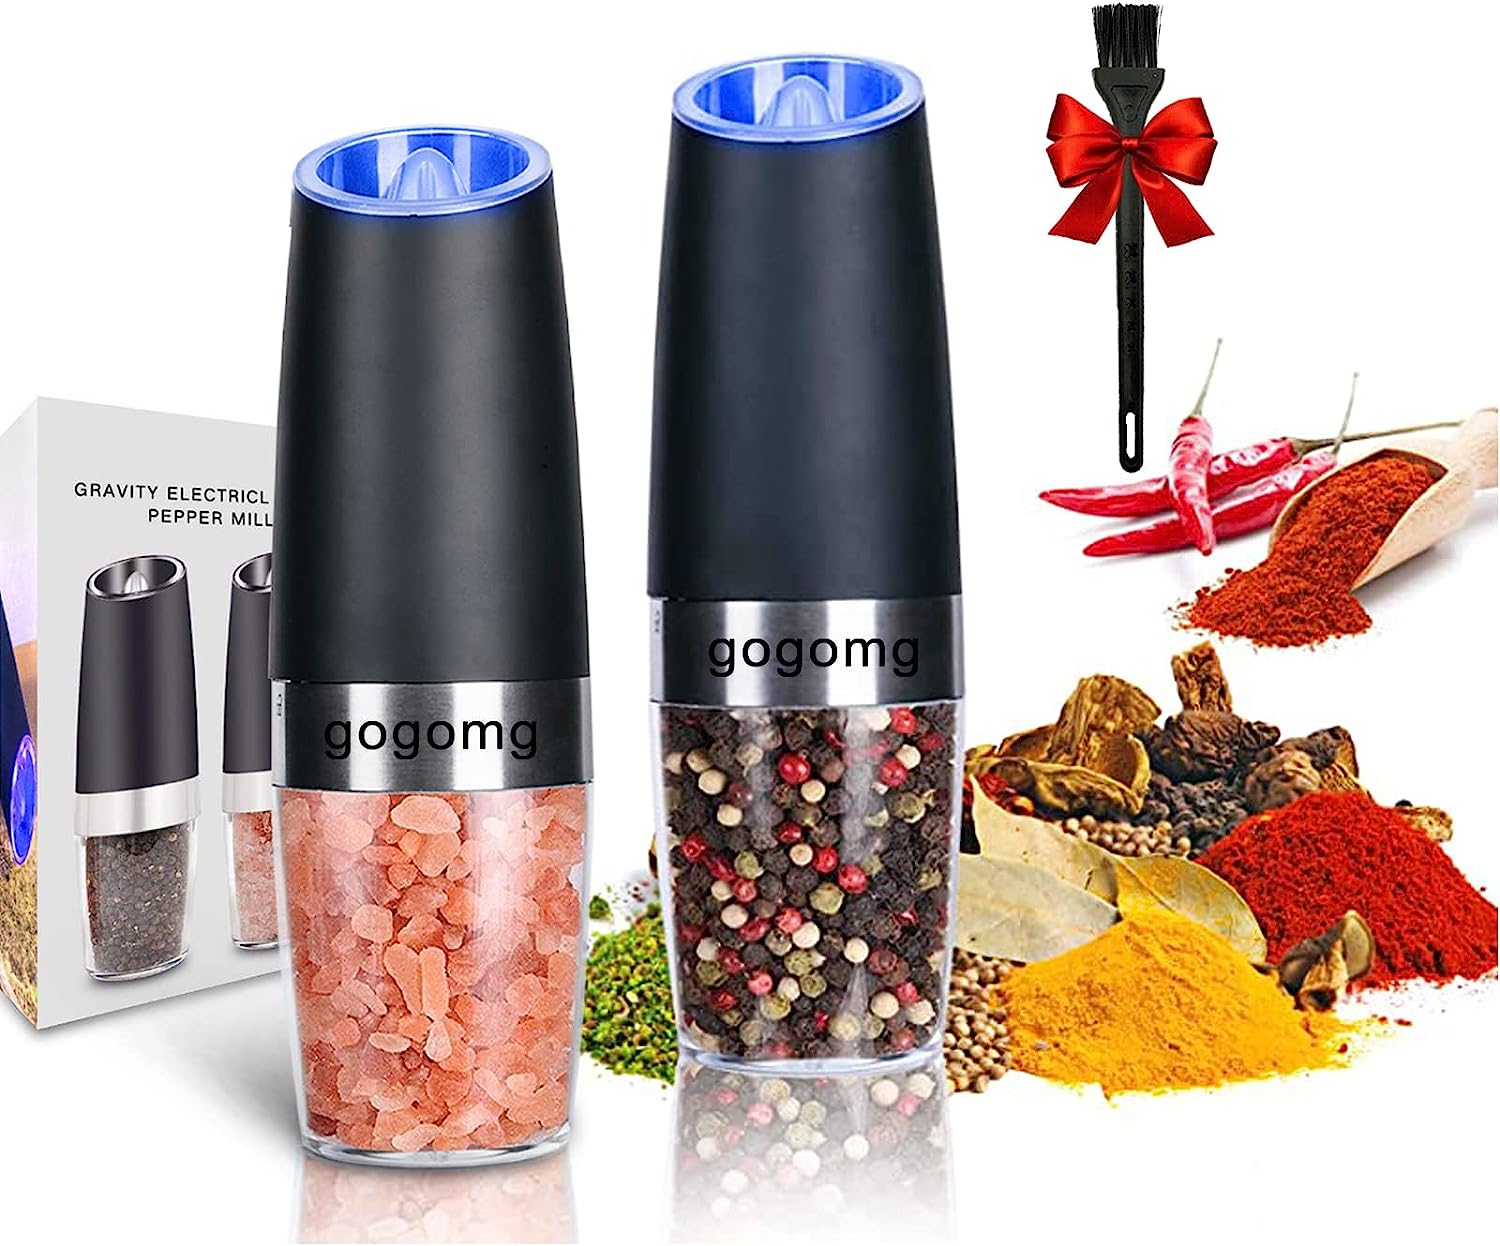 Electric Salt and Pepper Grinder Set, Gravity Sensor, Automatic Pepper Mill, One Hand Operation, Battery-Operated with Adjustable Coarseness, Blue Led Light